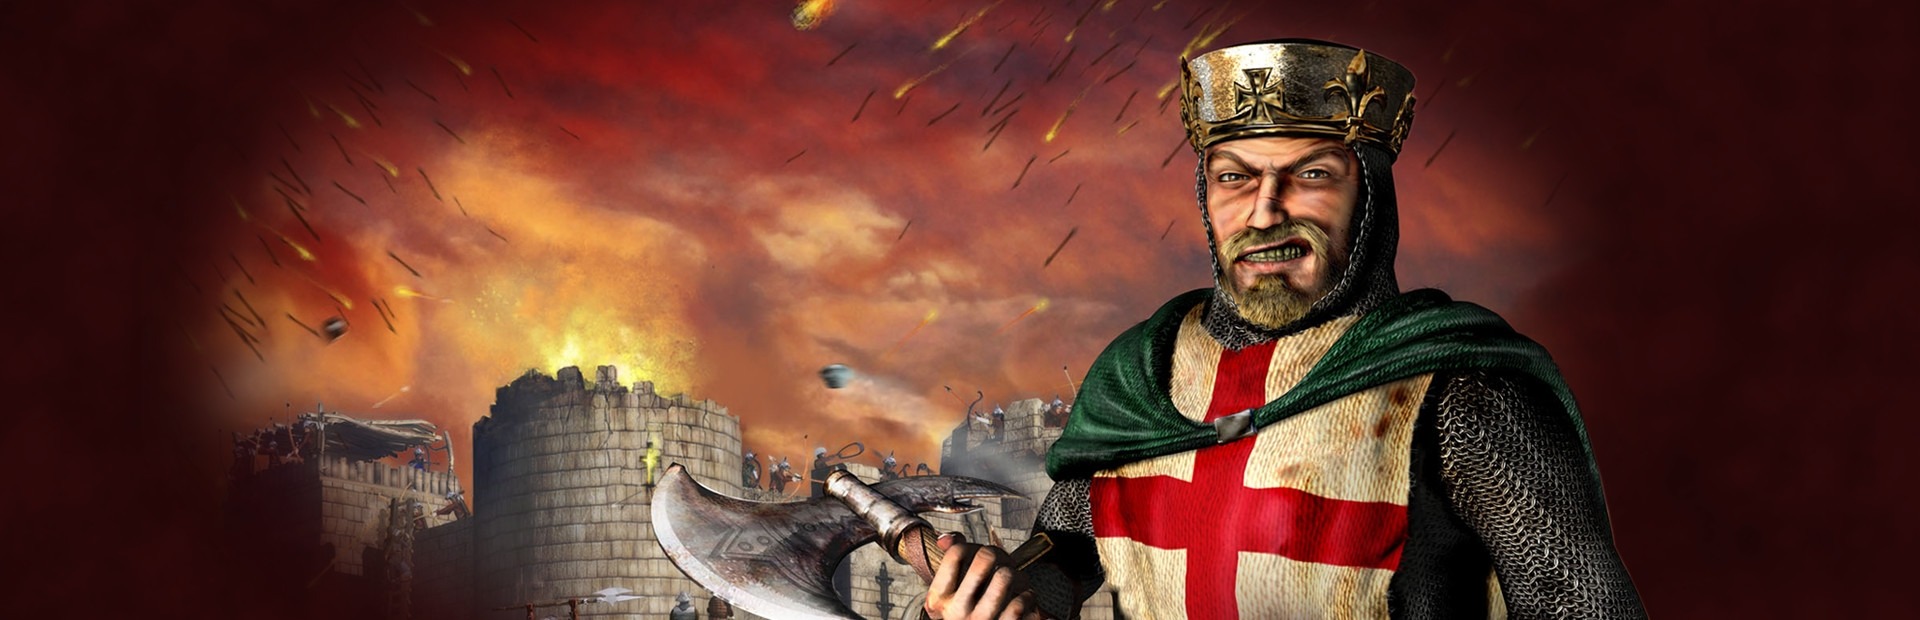 Stronghold HD + Stronghold Crusader HD Pack